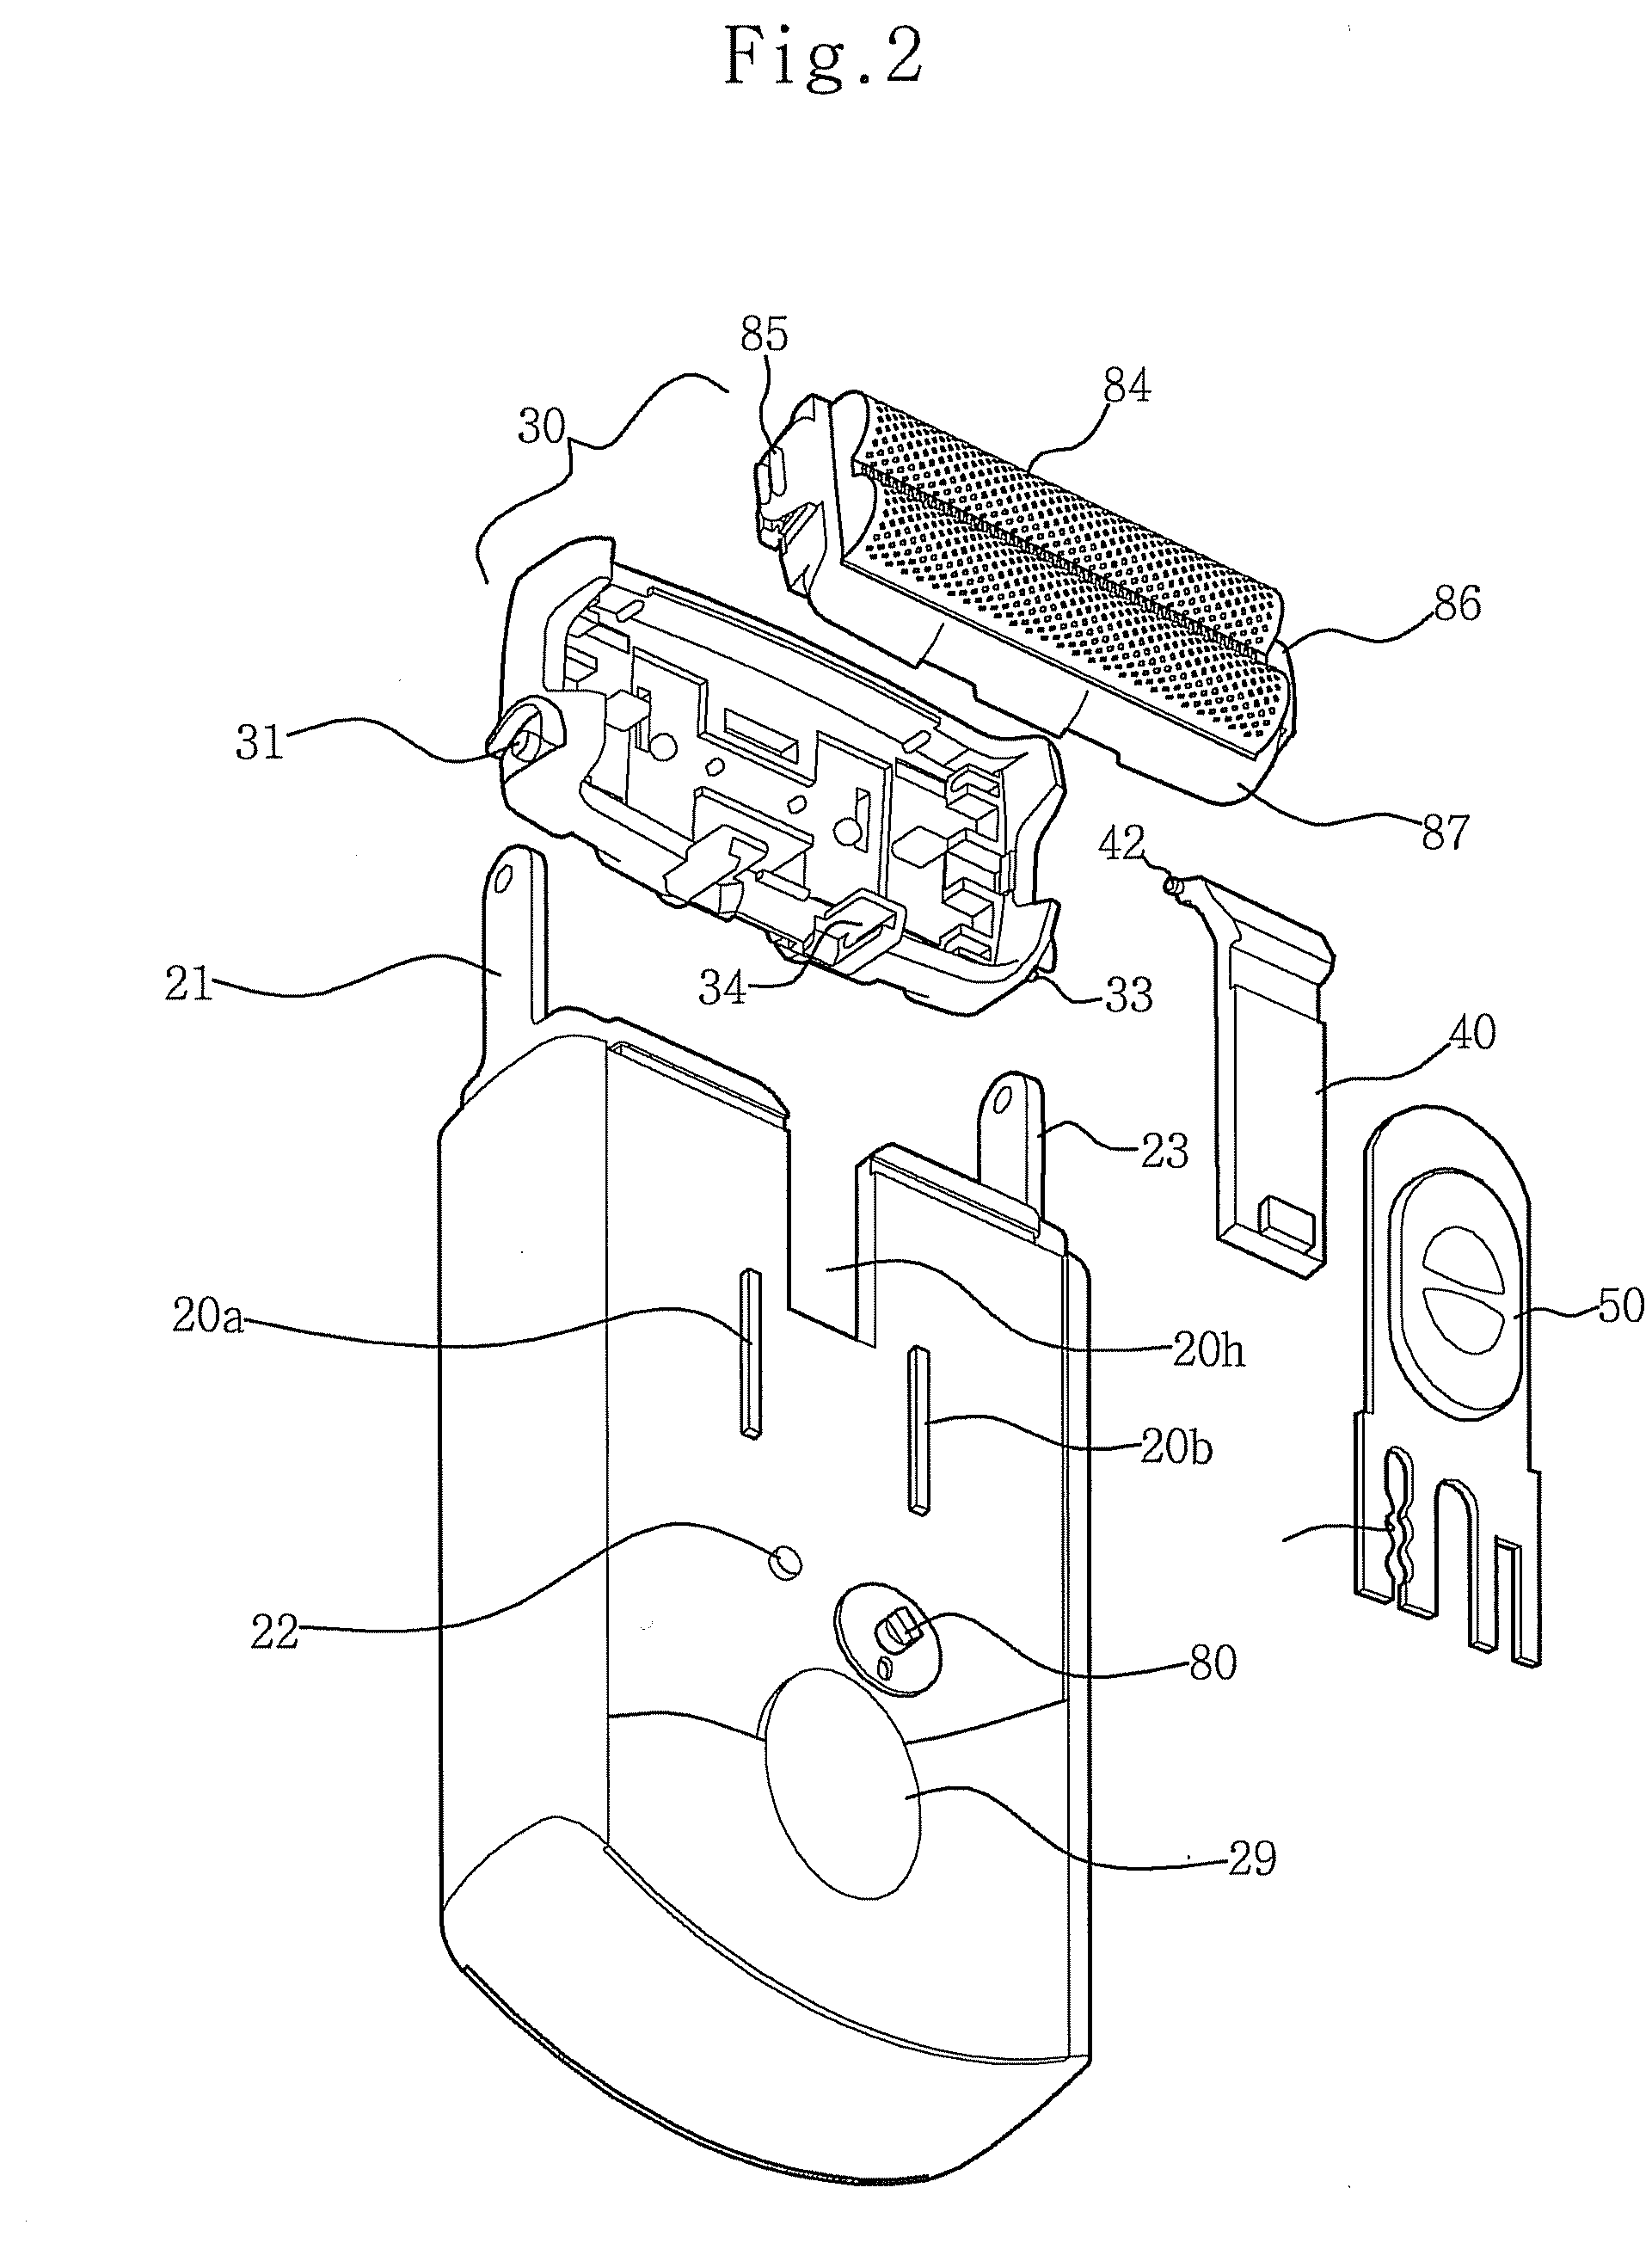 Head tilting device of electric shaver